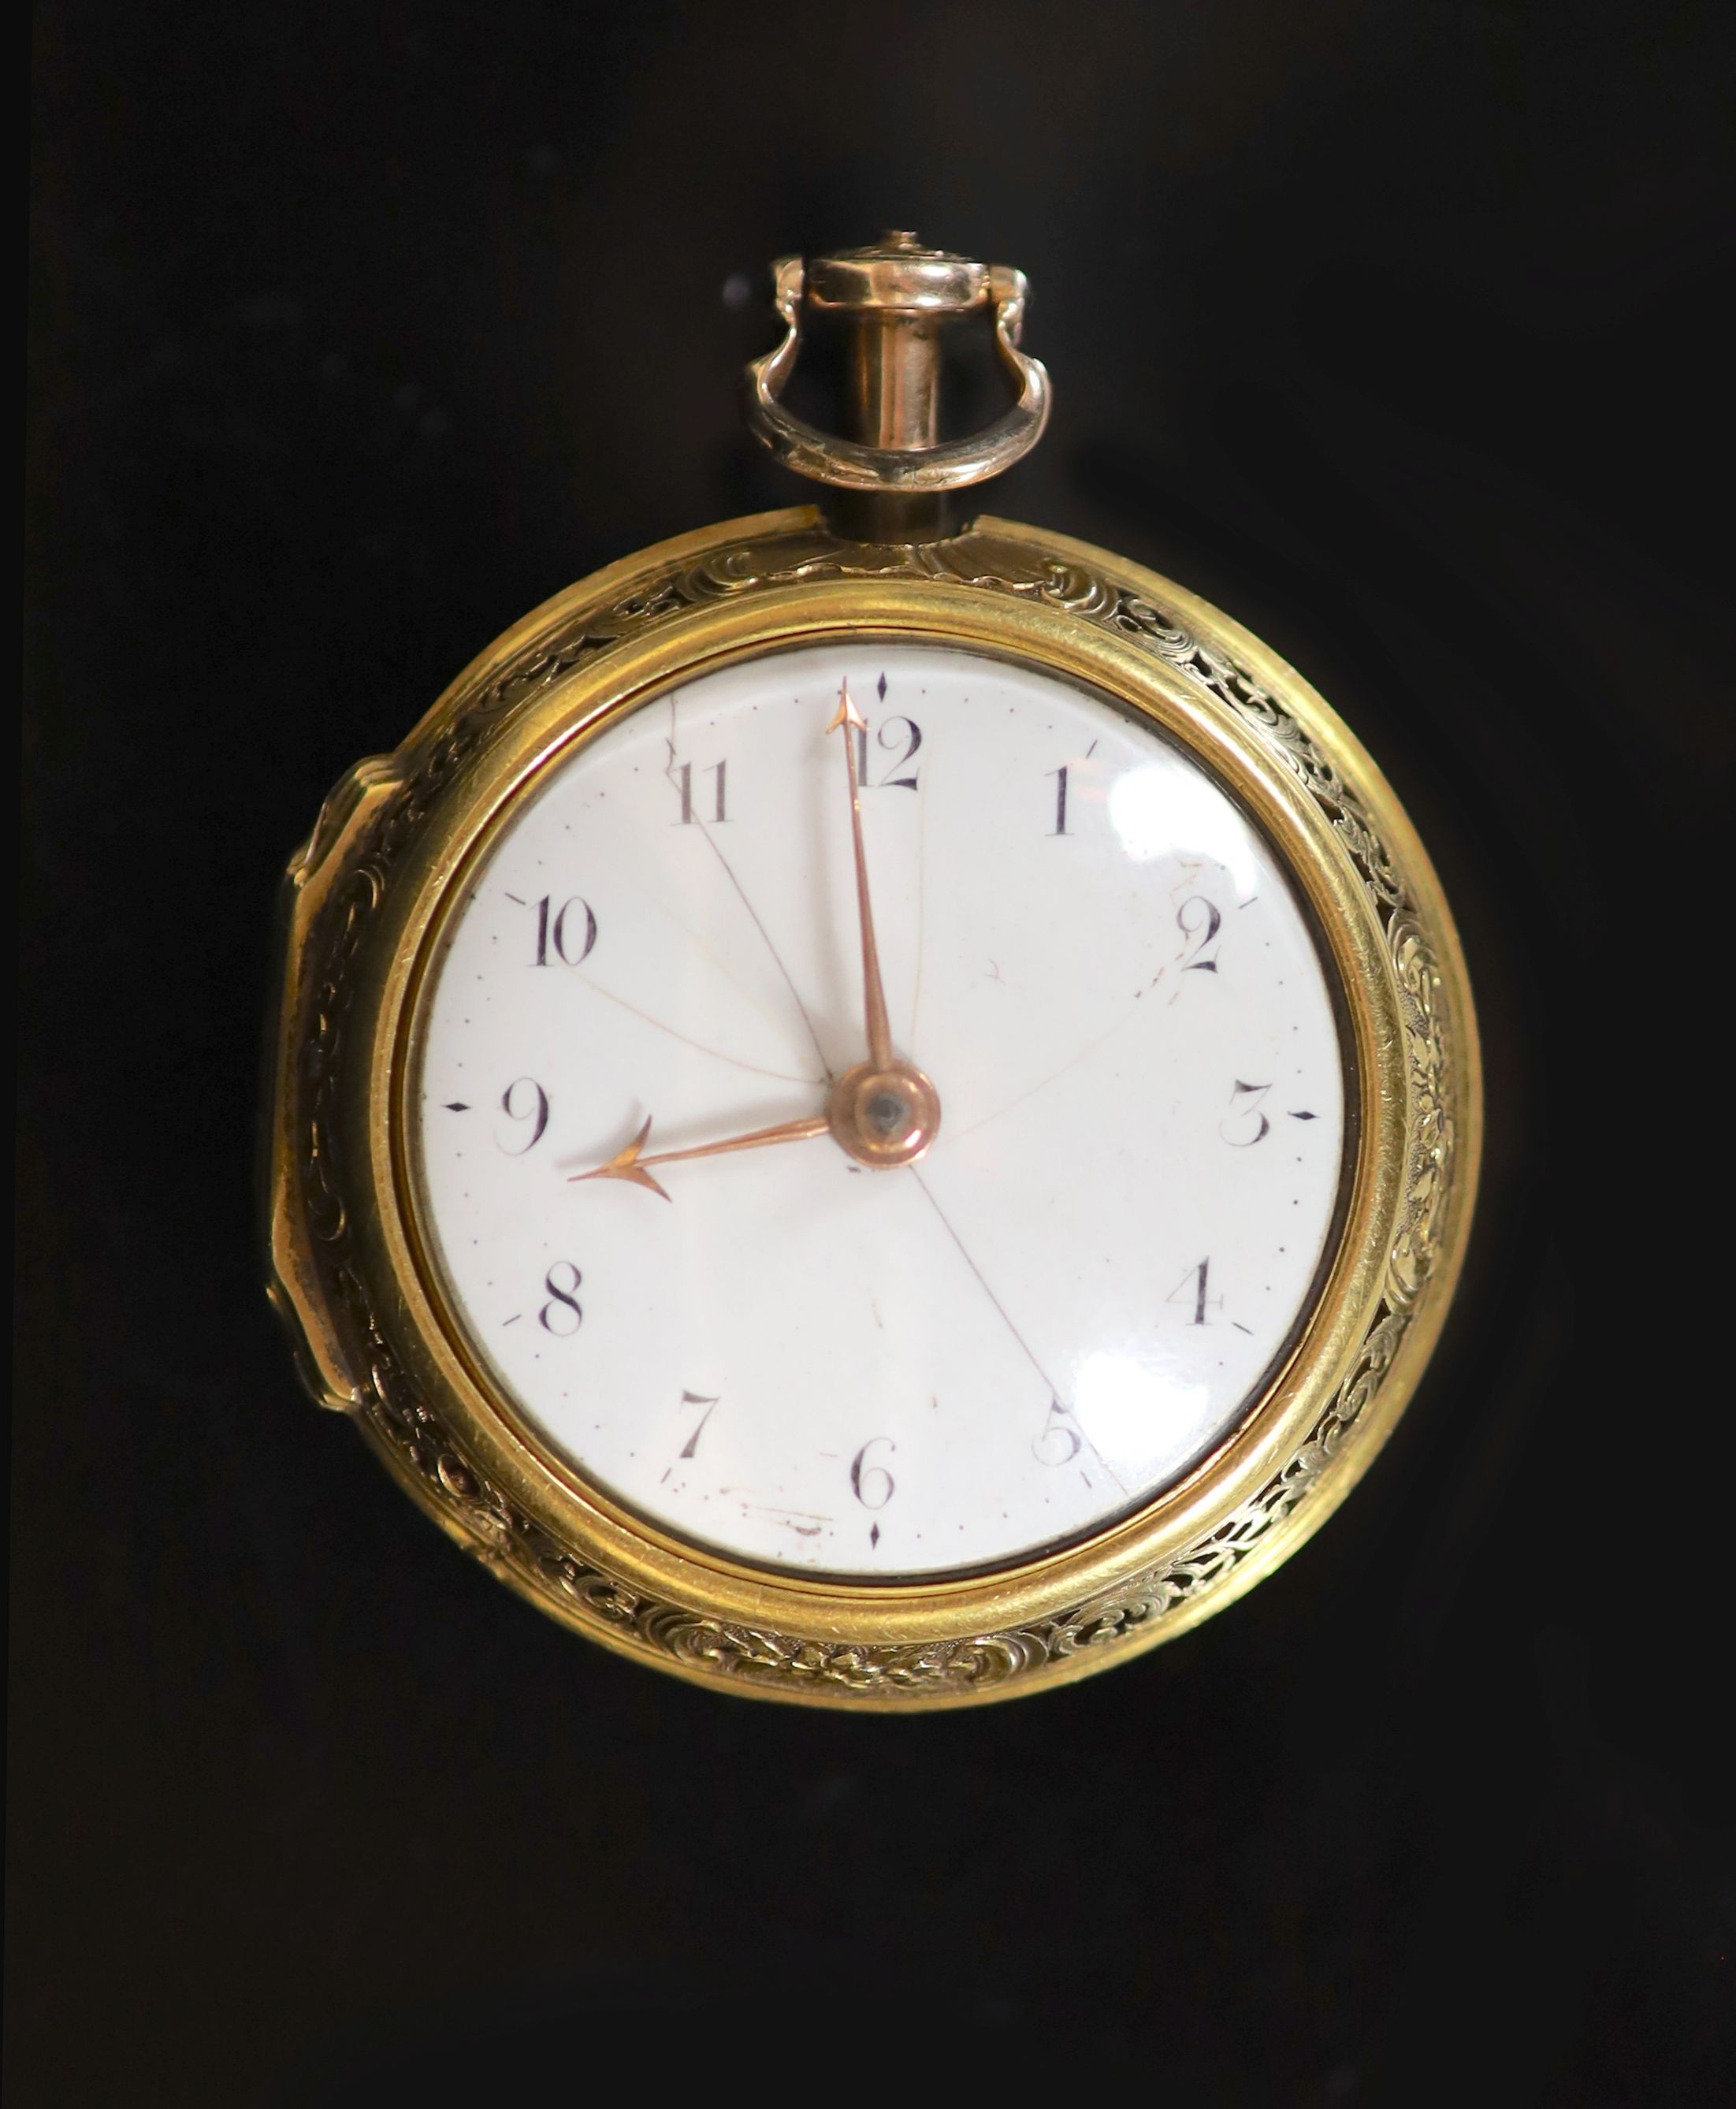 A George III gold pair cased keywind quarter repeating pocket watch by Thomas Gardner of Londonwith